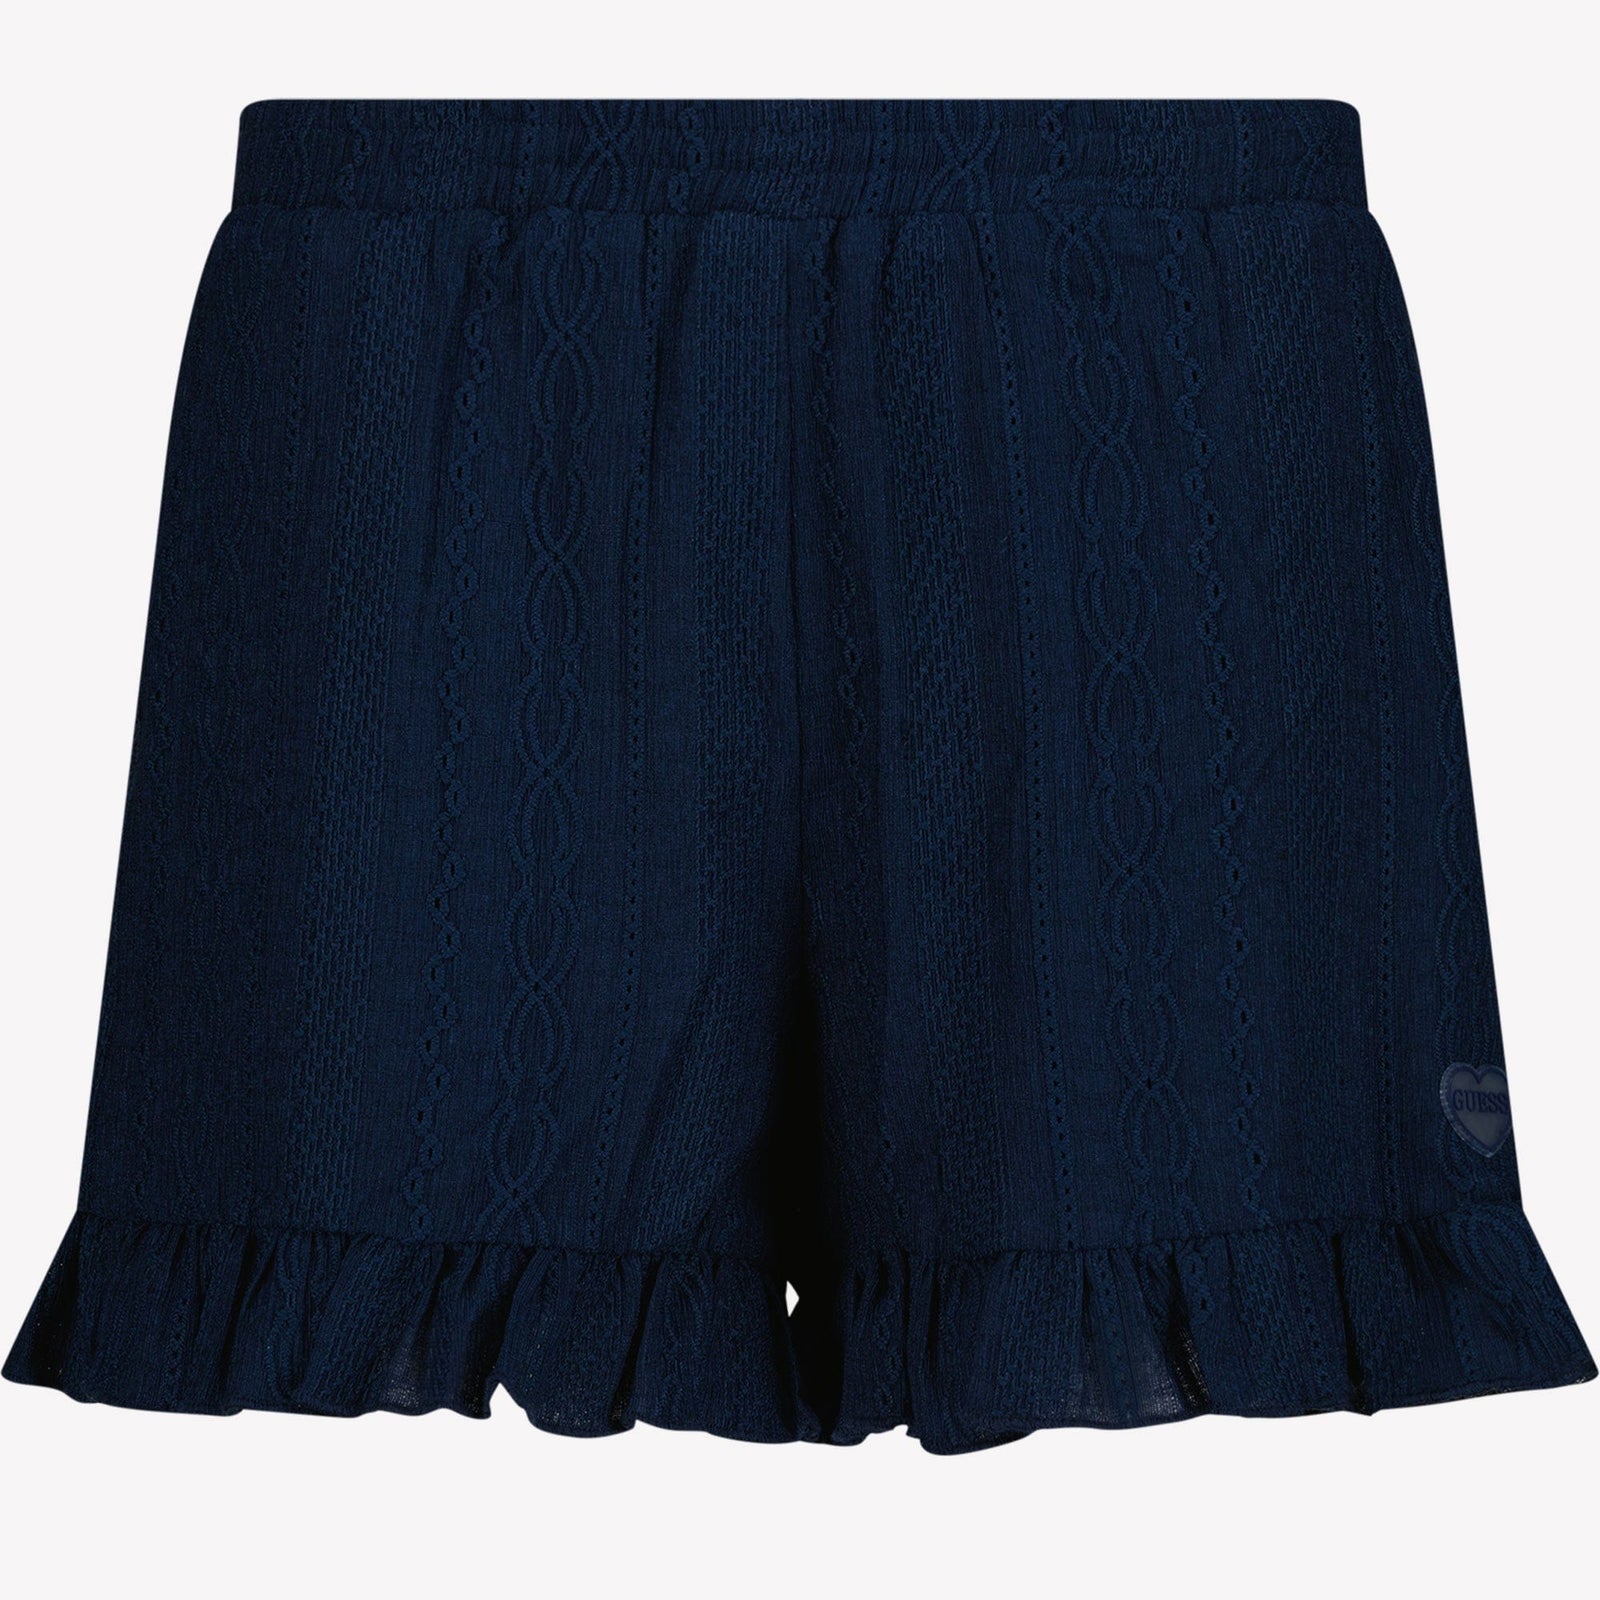 Guess Baby Meisjes Shorts Navy 12